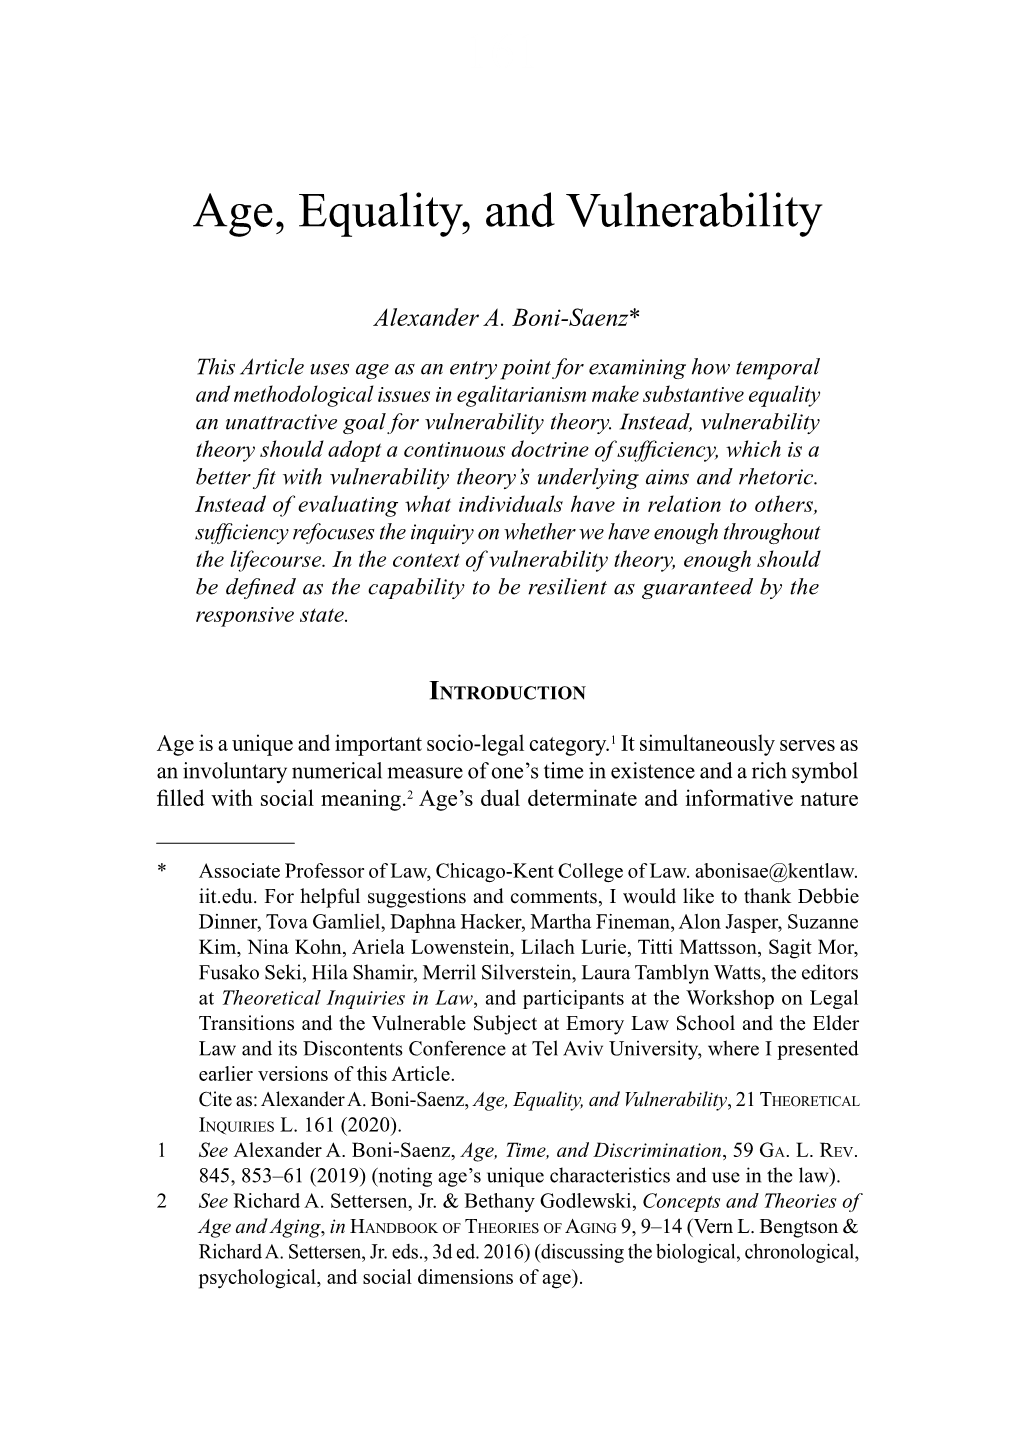 Age, Equality, and Vulnerability